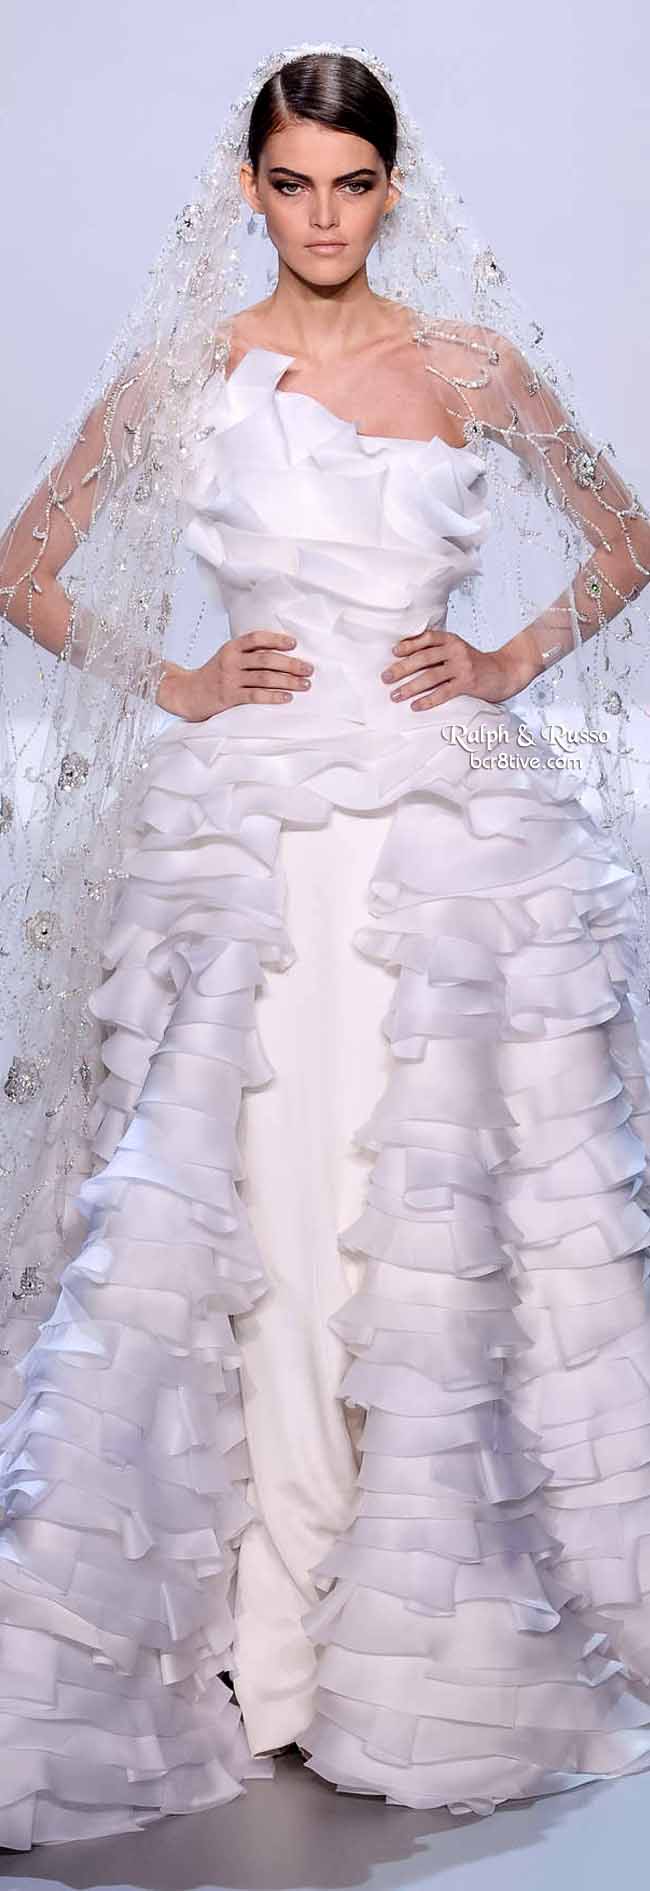 Ralph & Russo Spring 2014 Haute Couture